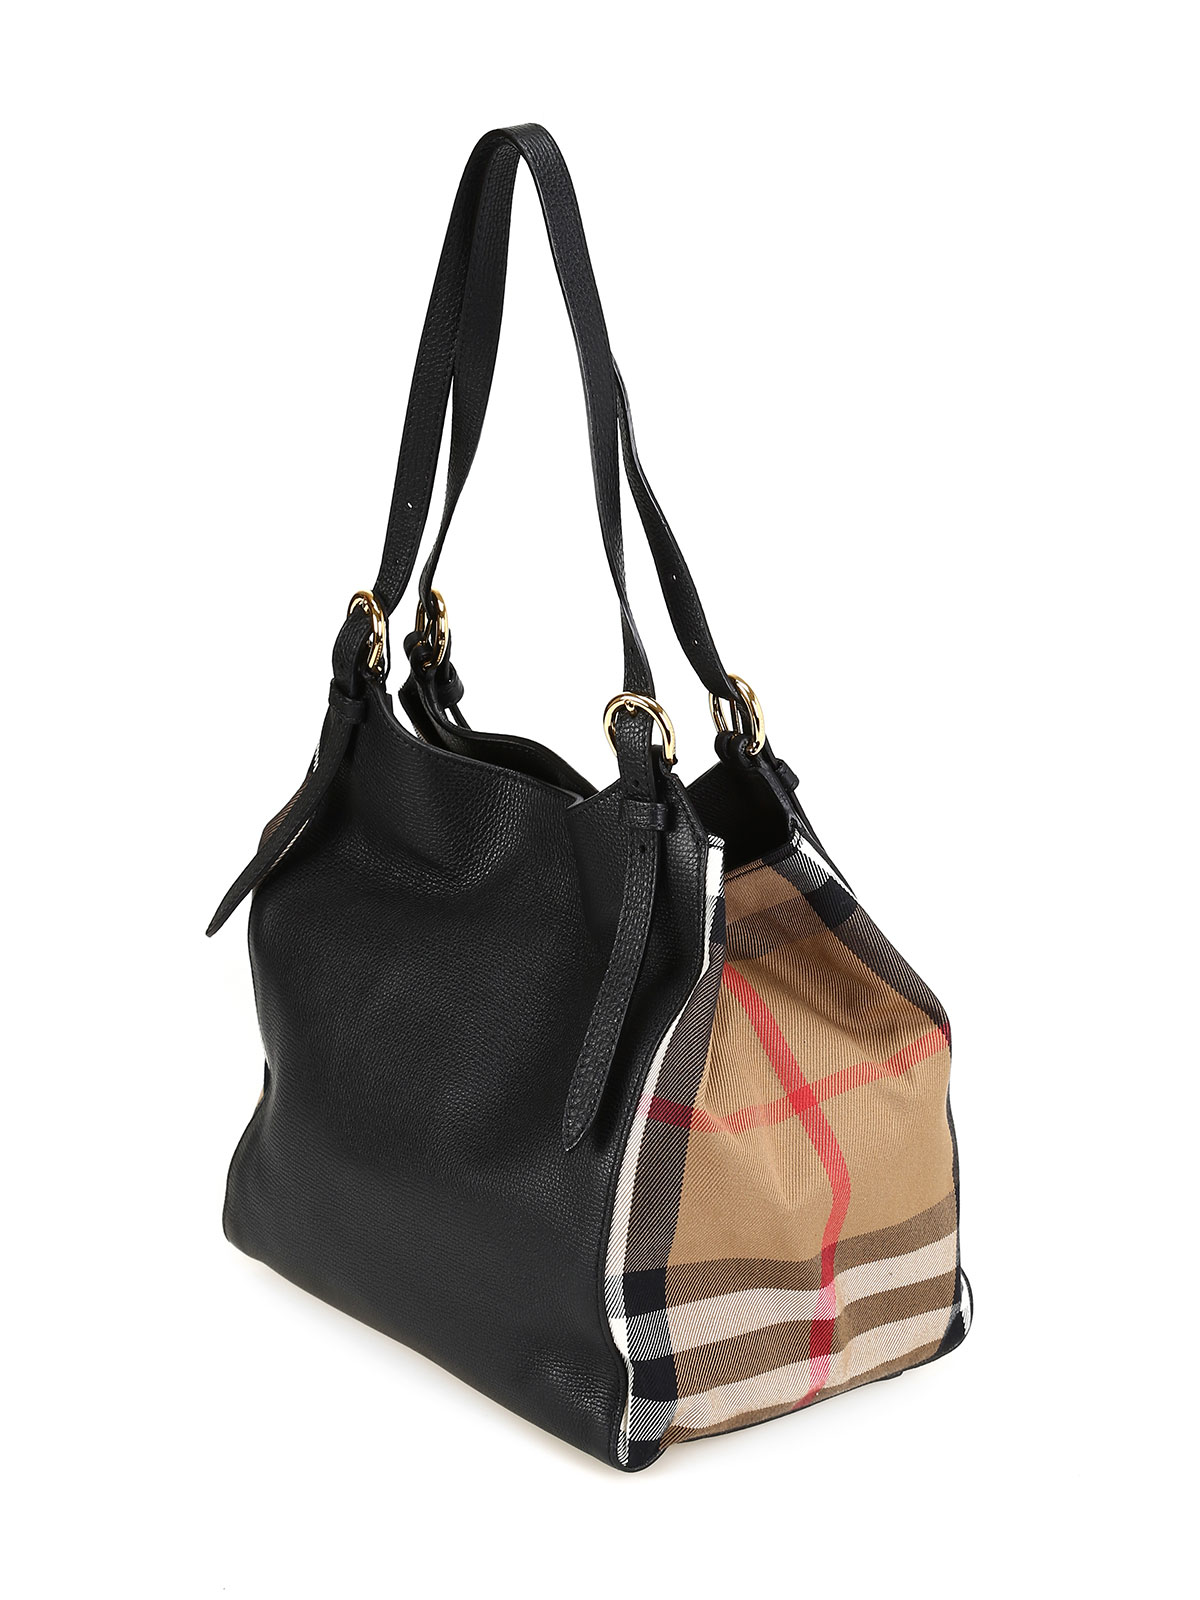 Burberry Canterbury Leather Tote in Black